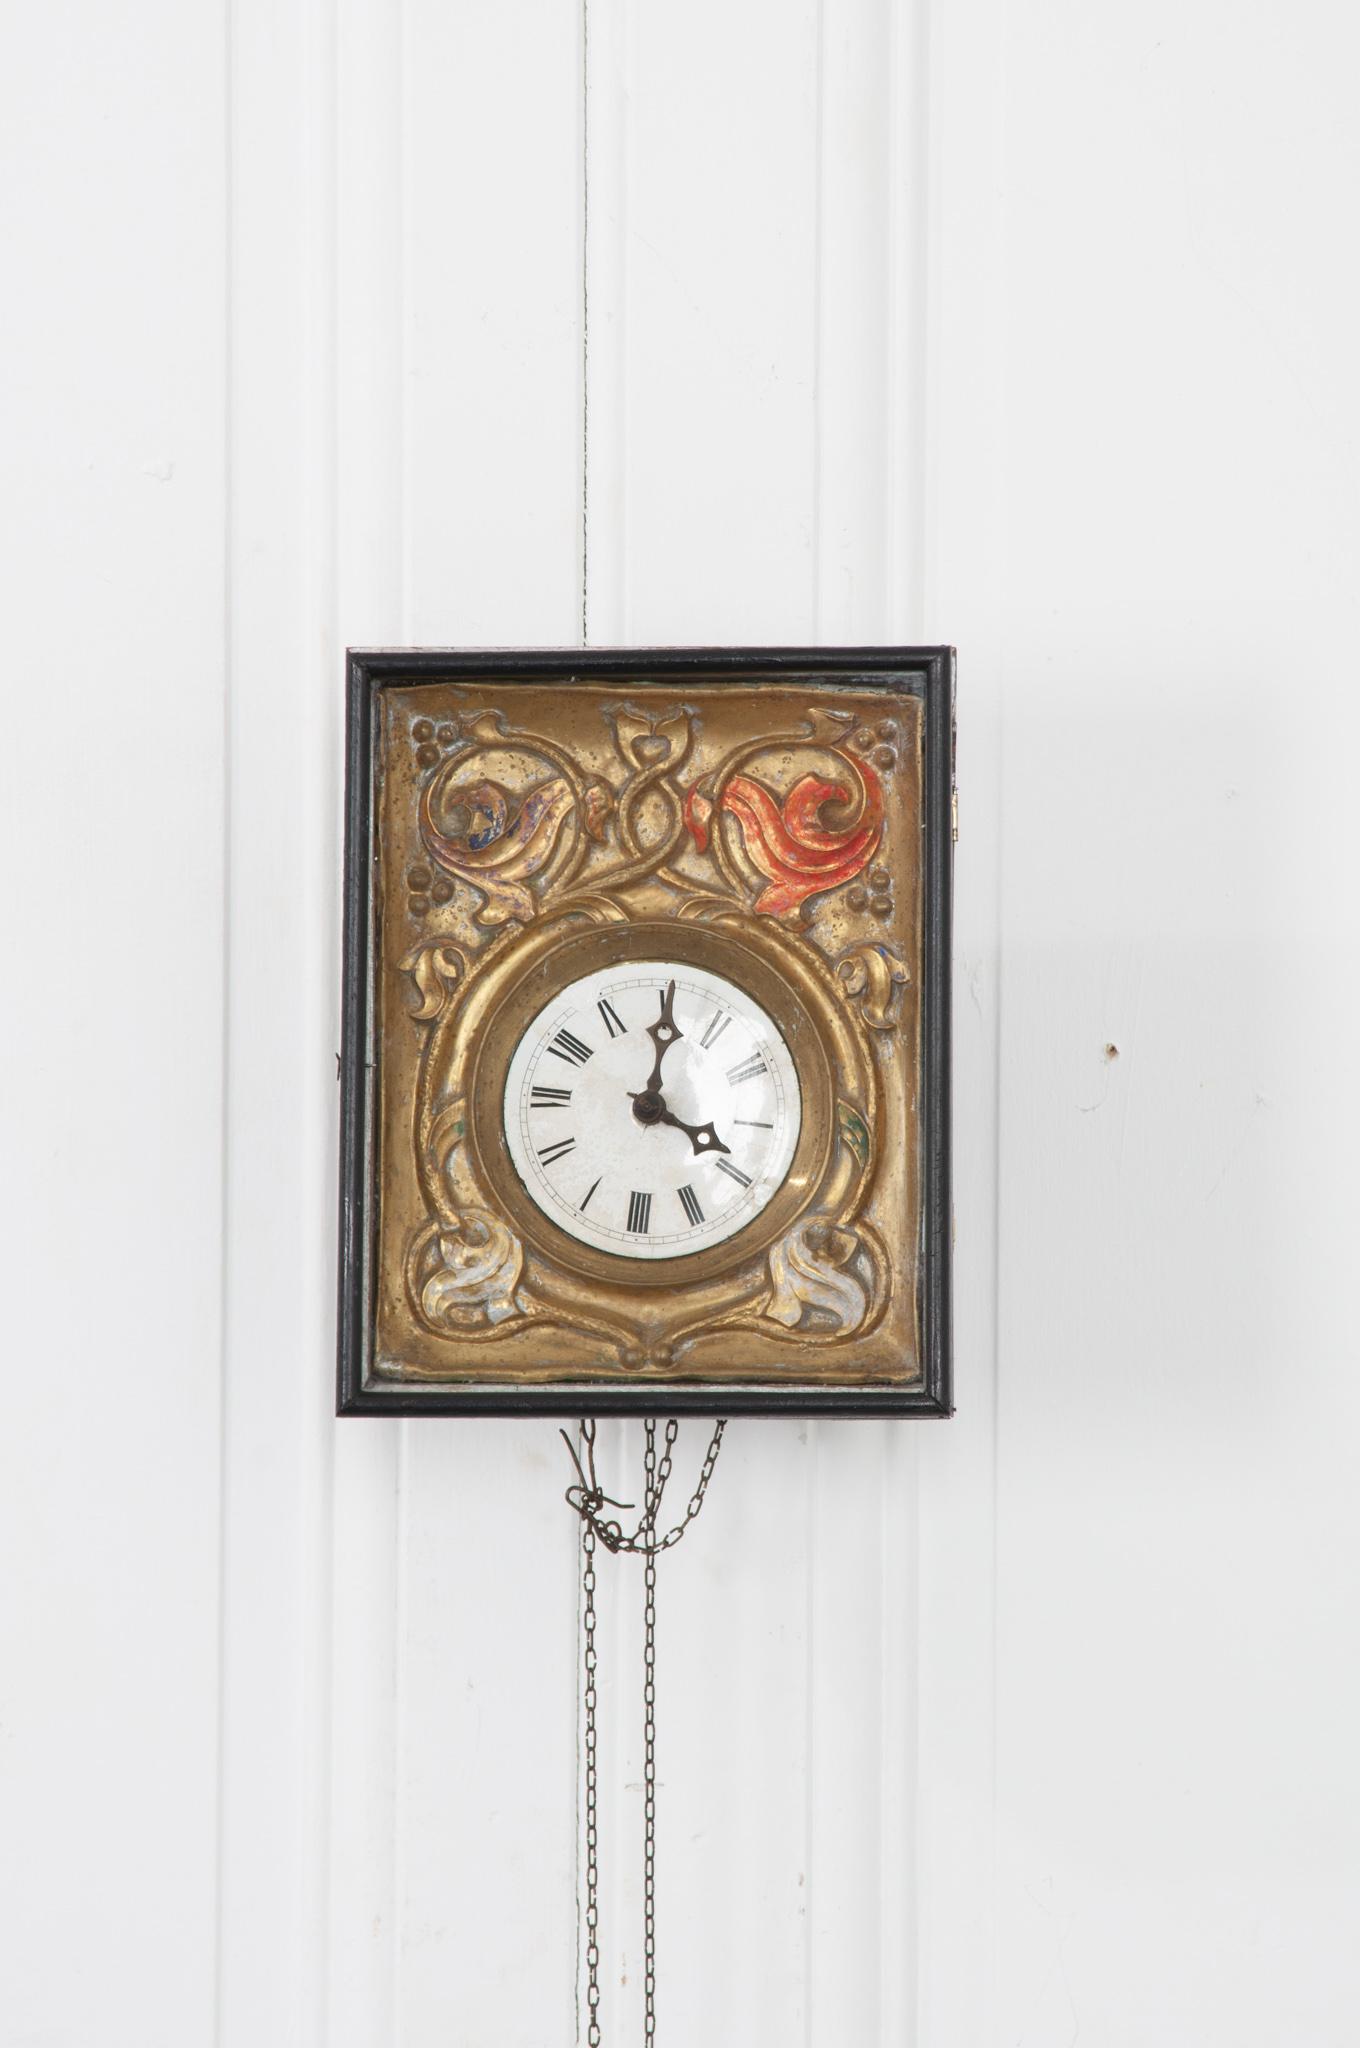 Although this German Black Forest 19th century framed clock no longer works, the beauty of its composition gives it another life as a work of art. Behind the glass, the clock face is set in a beautifully stamped and painted metal plate. Age and use